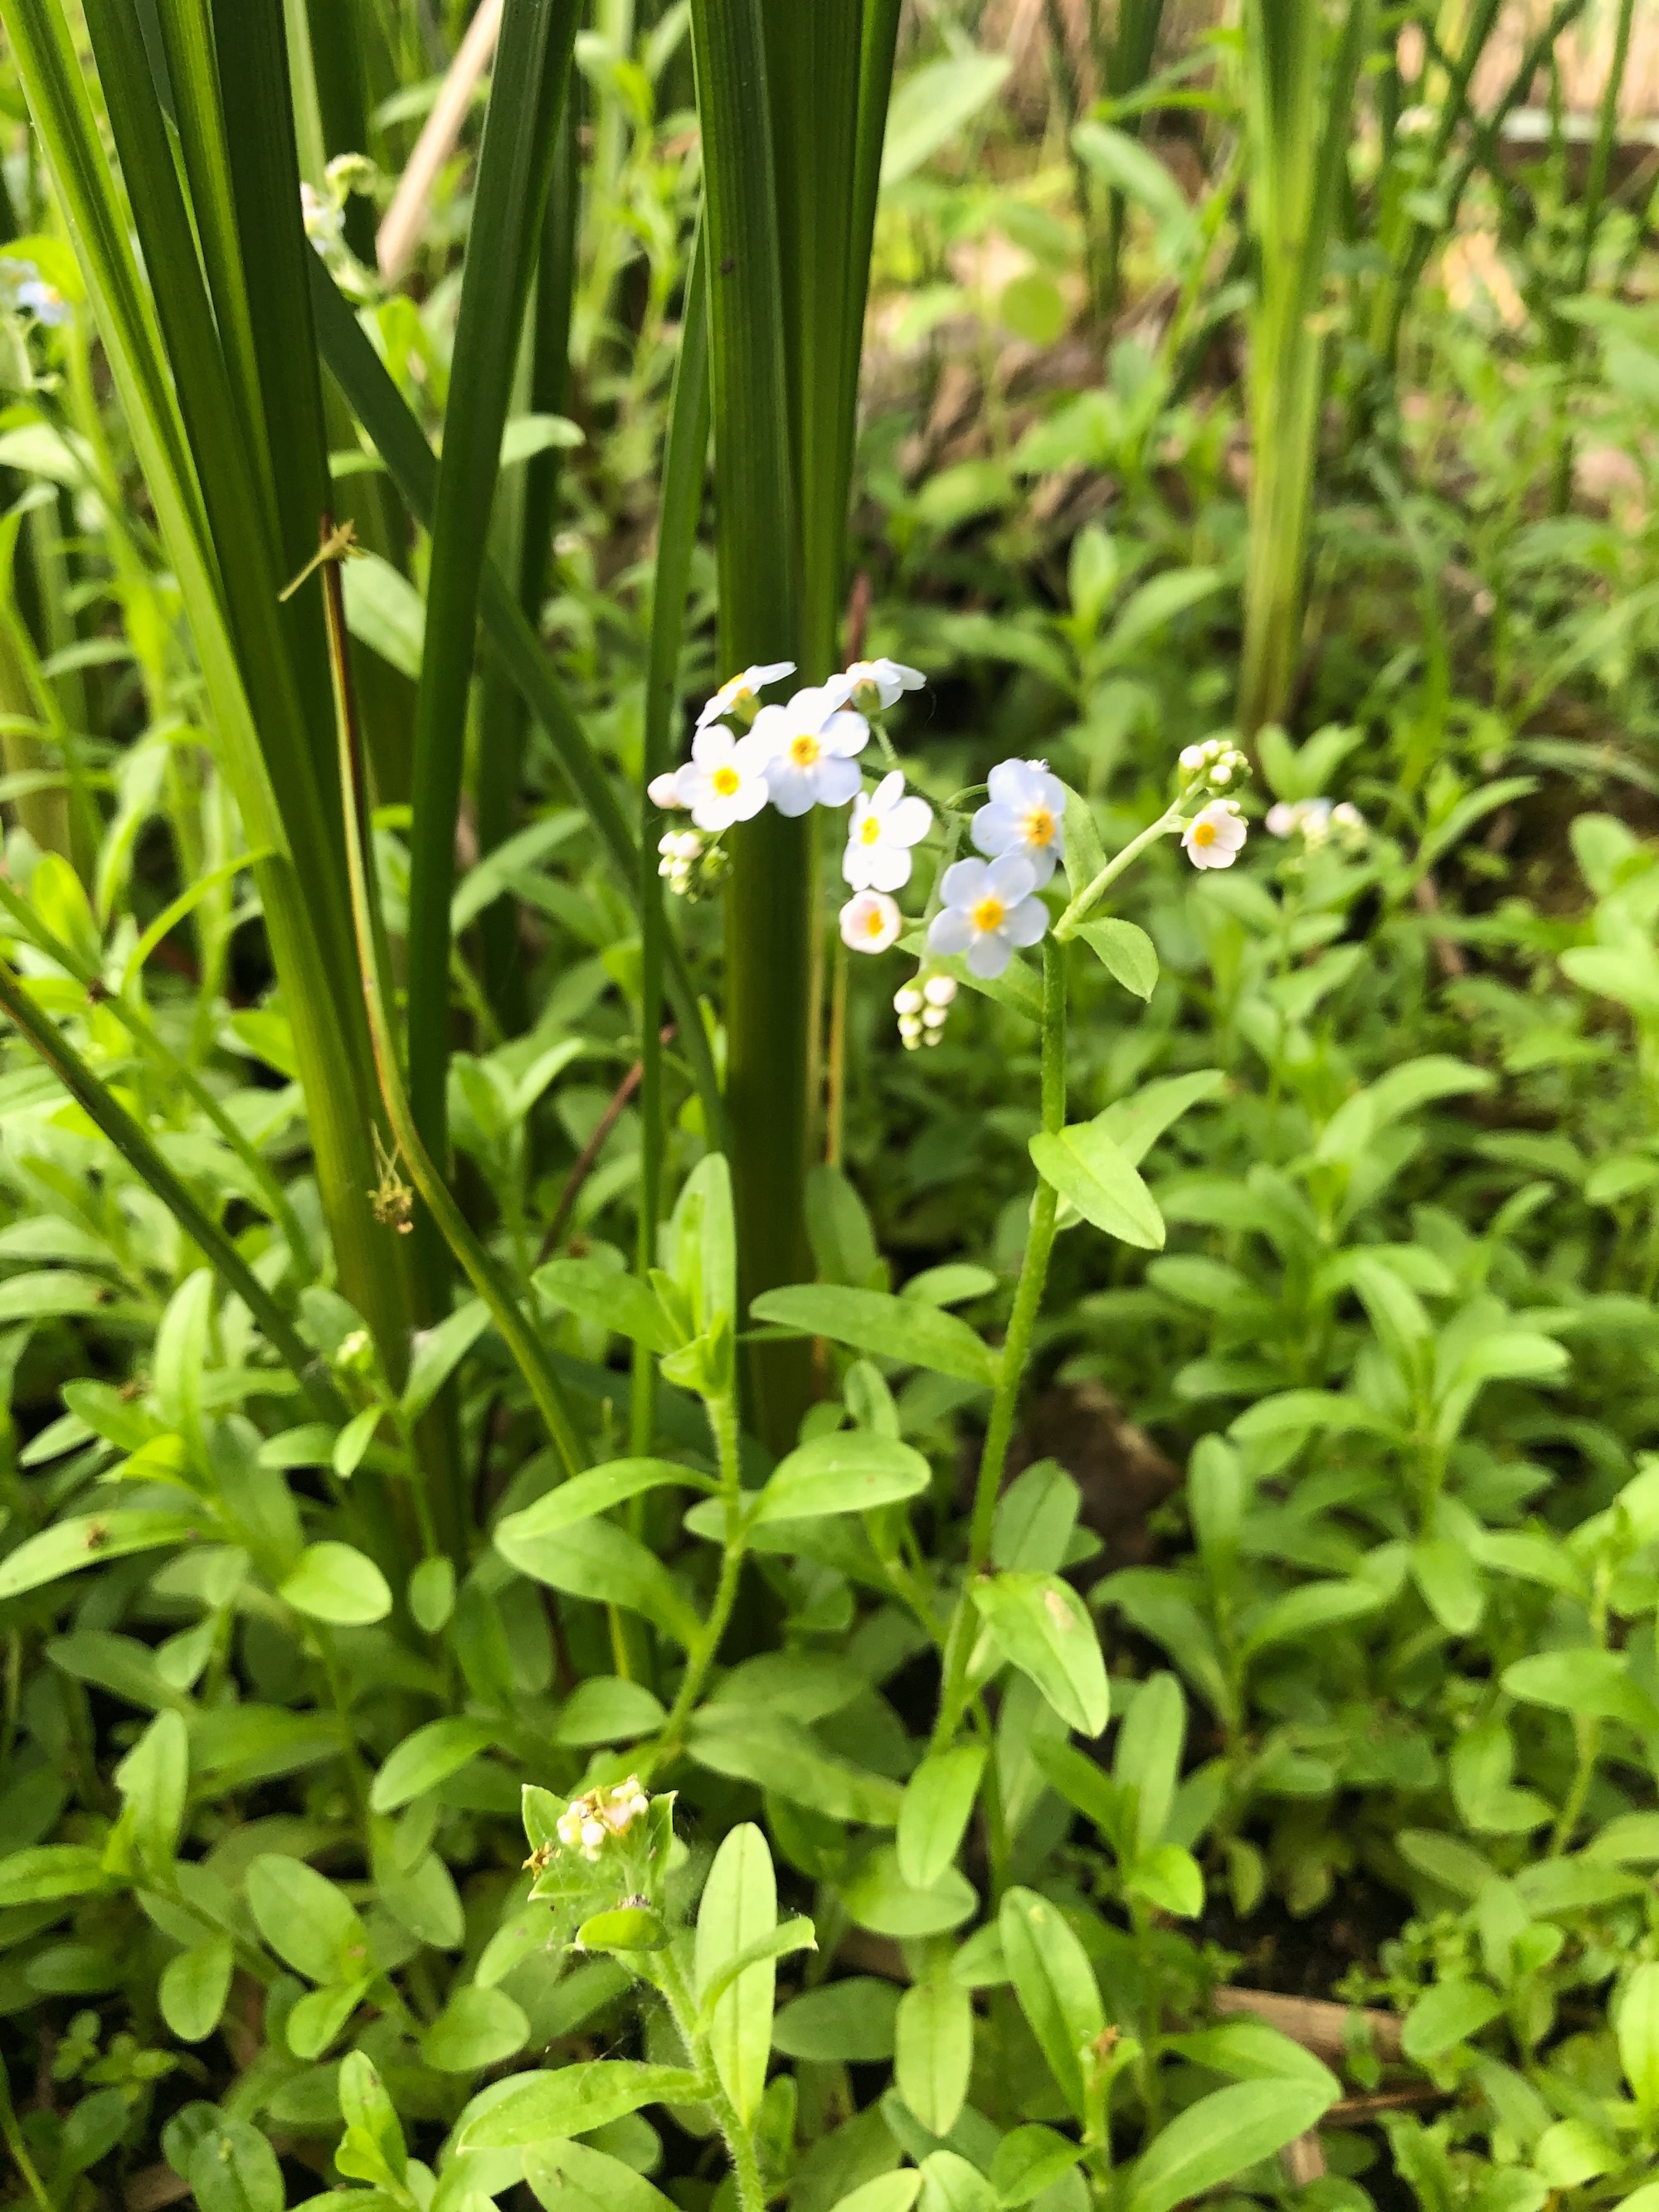 True Forget-me-not near cattails at Pickford Street stormwater outflow into Lake Wingra in Madison, Wisconsin on May 25, 2021.